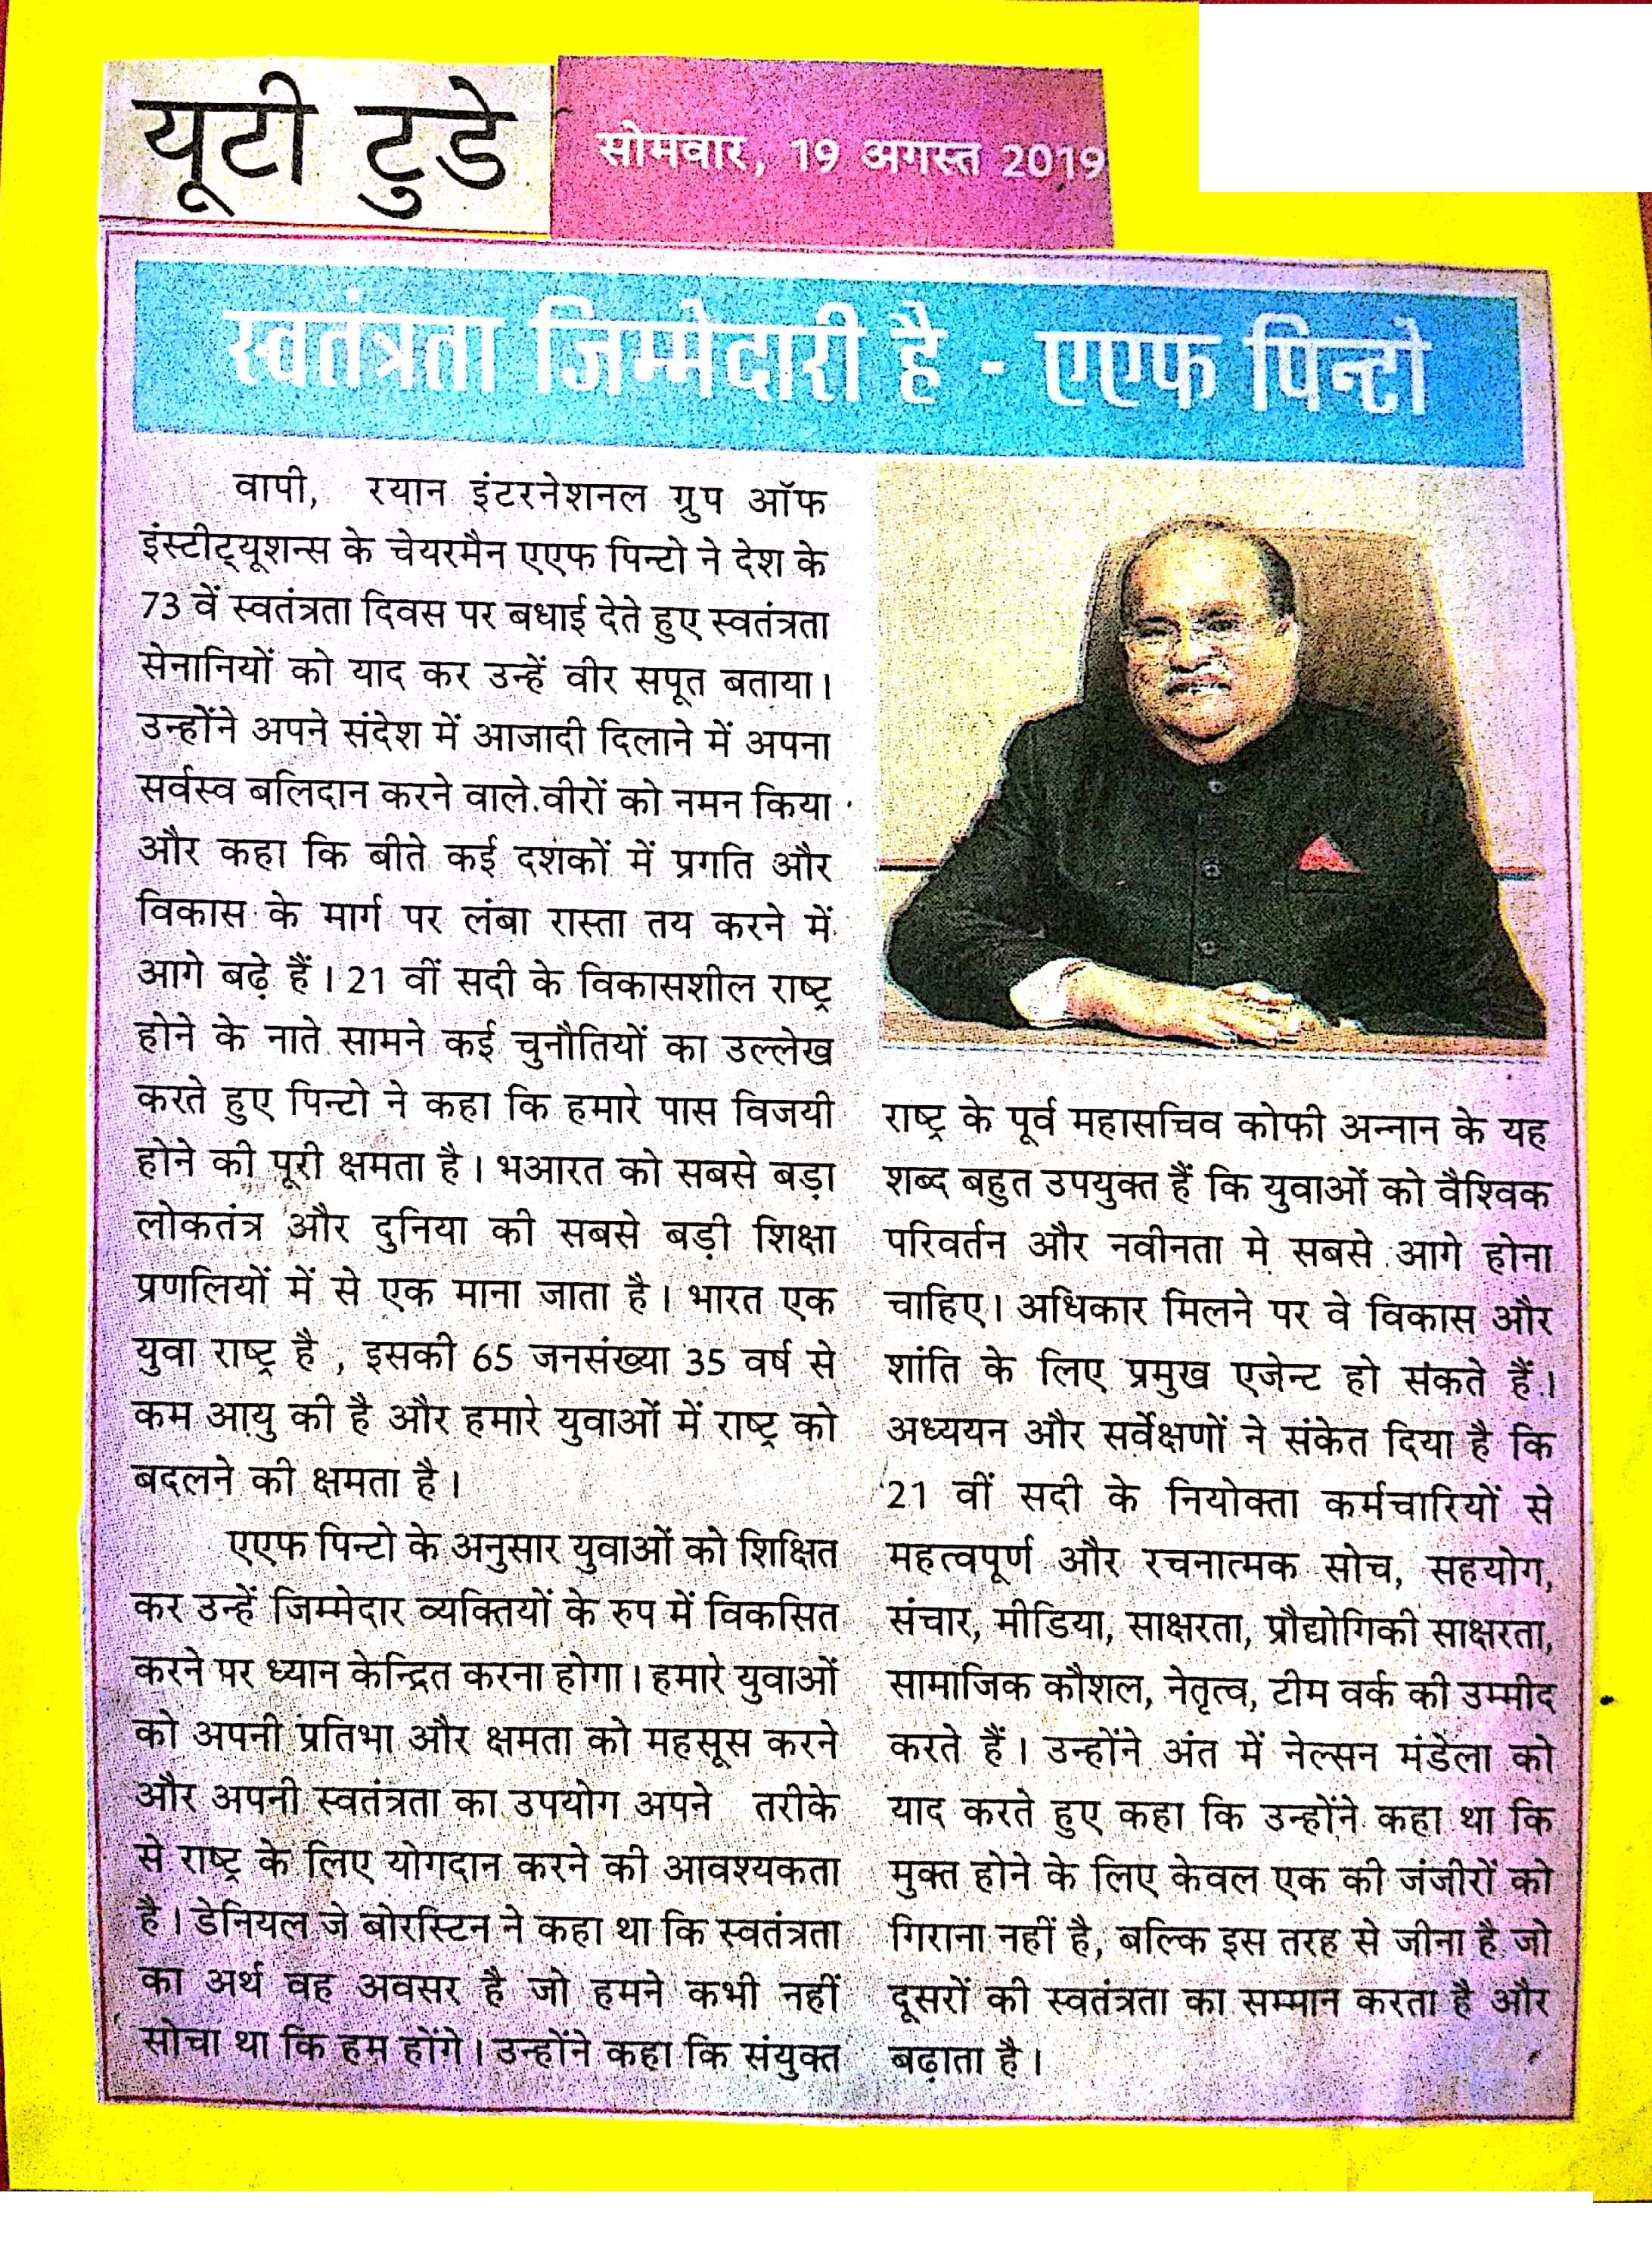 Chairman Sir’s Article On Christmas Was Featured In Valsad Sandesh